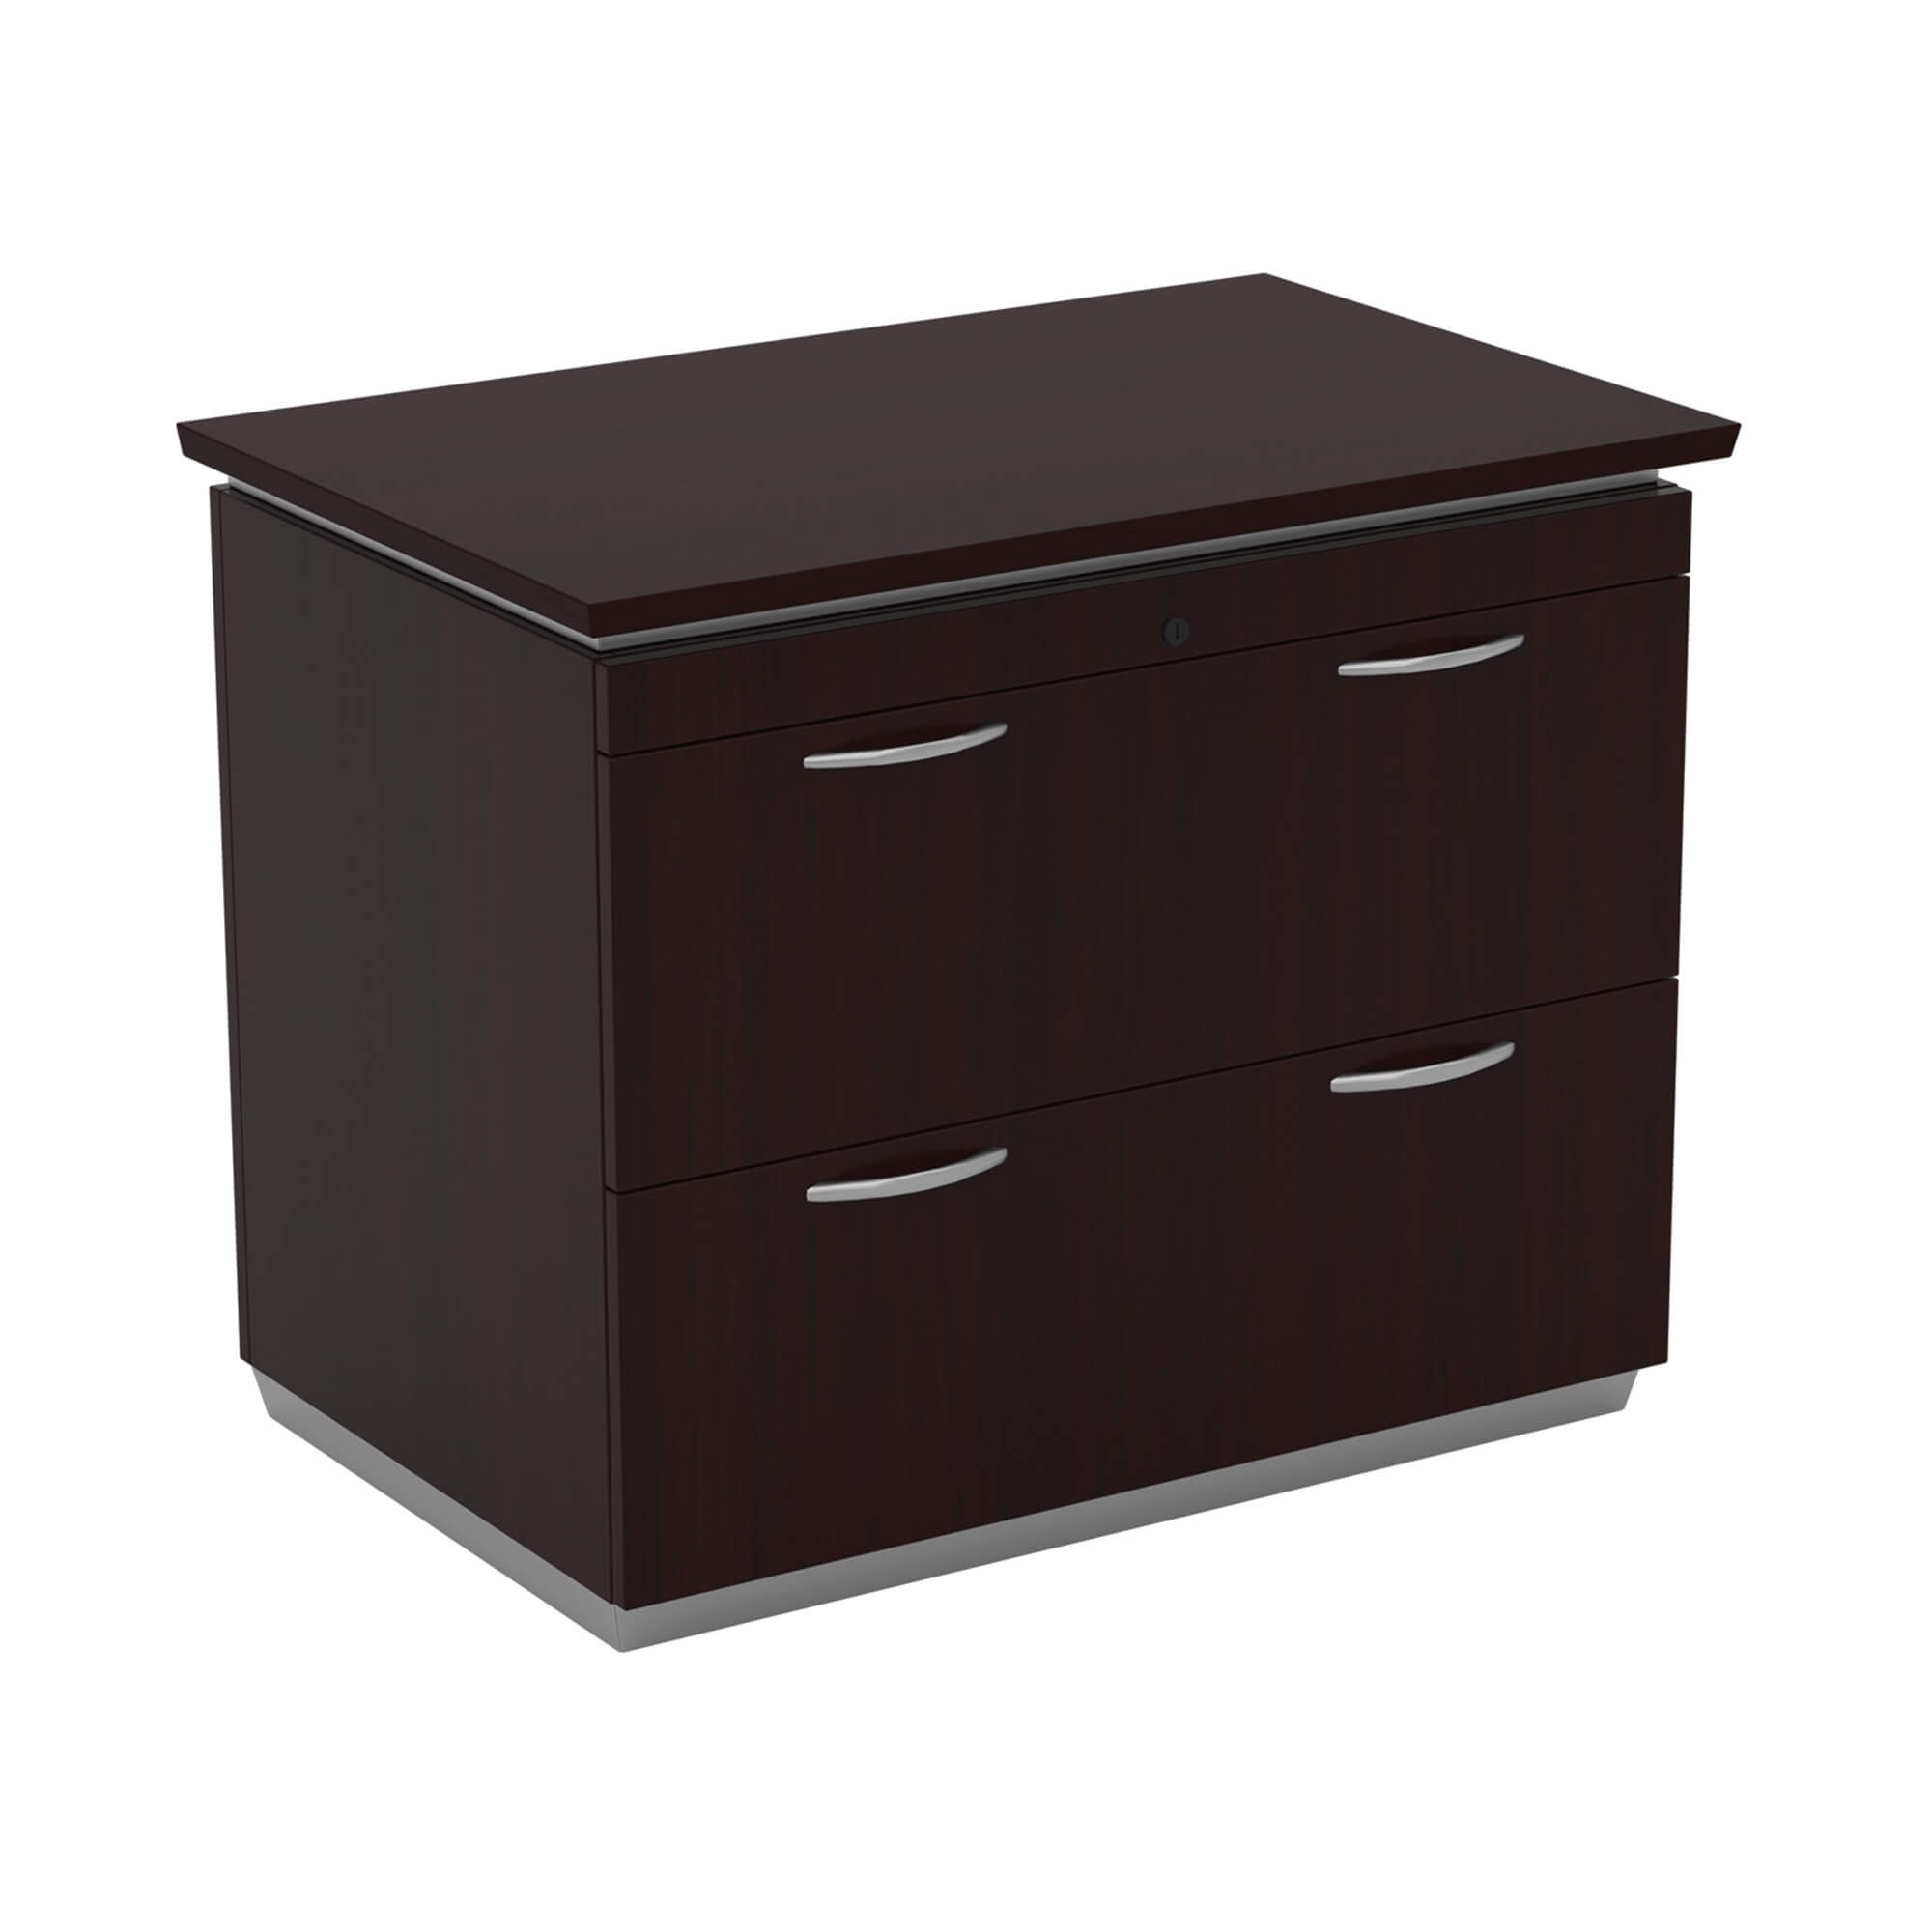 black-tie-conference-room-tables-2-drawer-lateral-file-36-inch.jpg